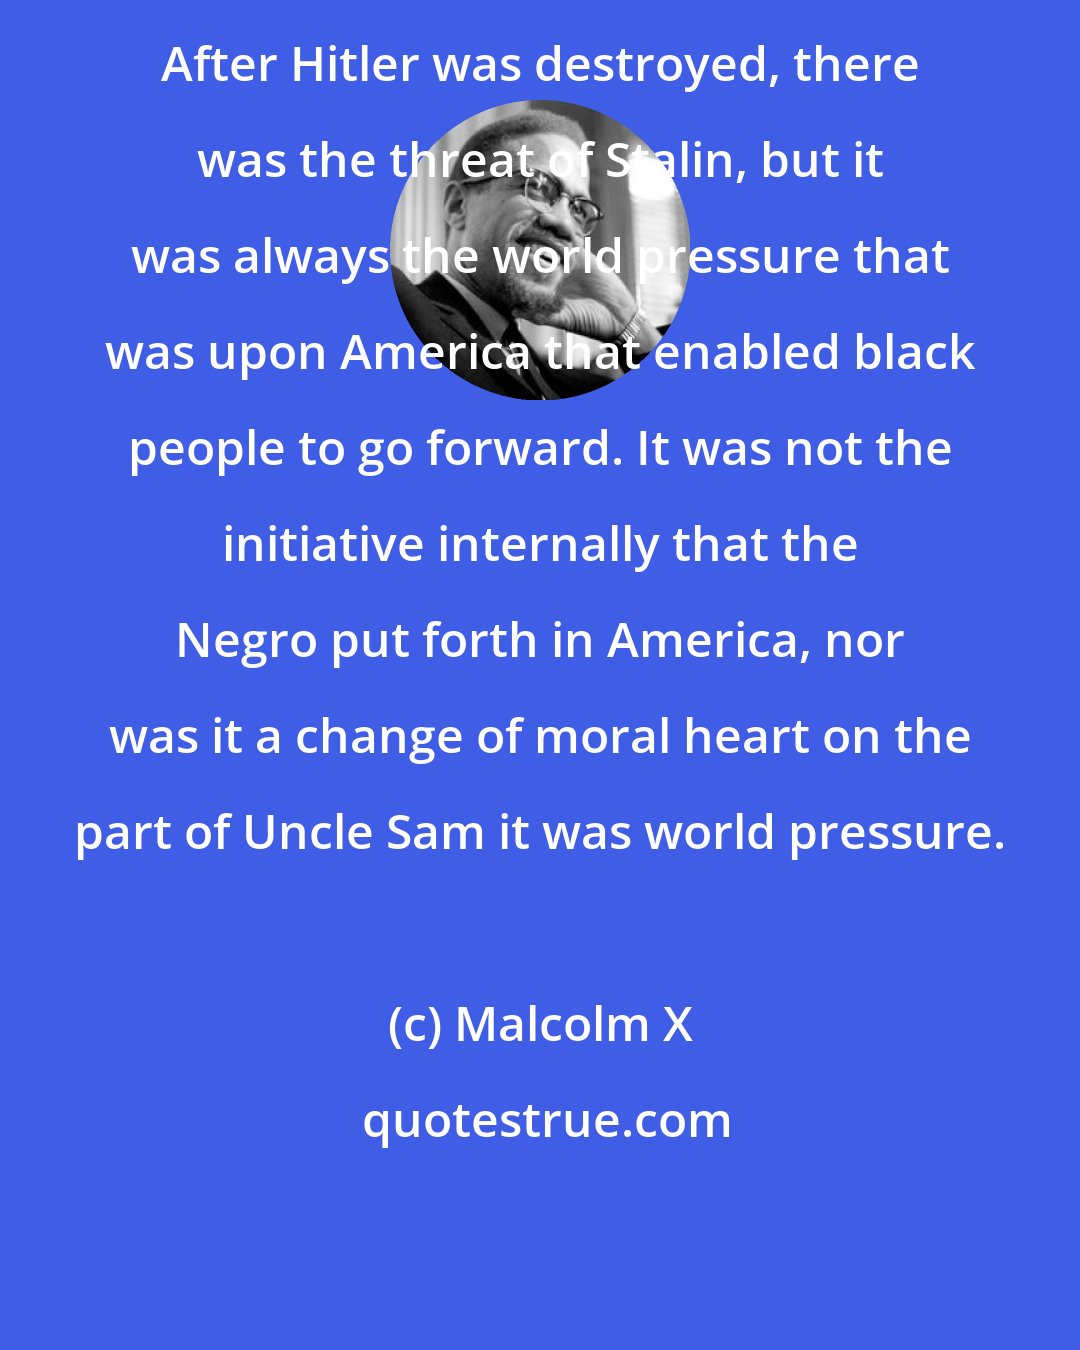 Malcolm X: After Hitler was destroyed, there was the threat of Stalin, but it was always the world pressure that was upon America that enabled black people to go forward. It was not the initiative internally that the Negro put forth in America, nor was it a change of moral heart on the part of Uncle Sam it was world pressure.